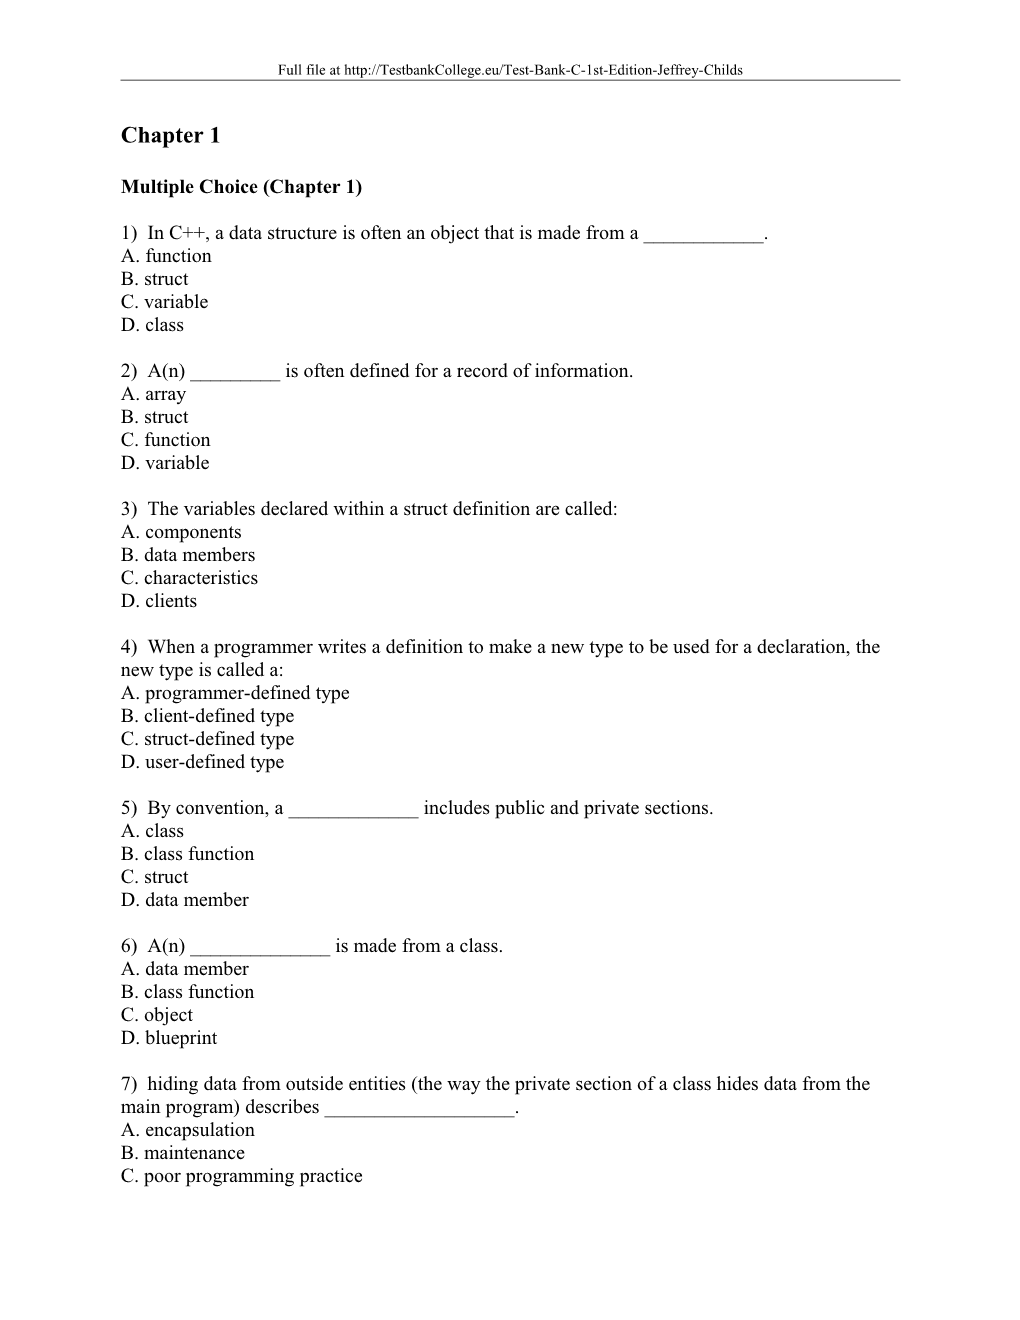 Multiple Choice (Chapter 1) s1